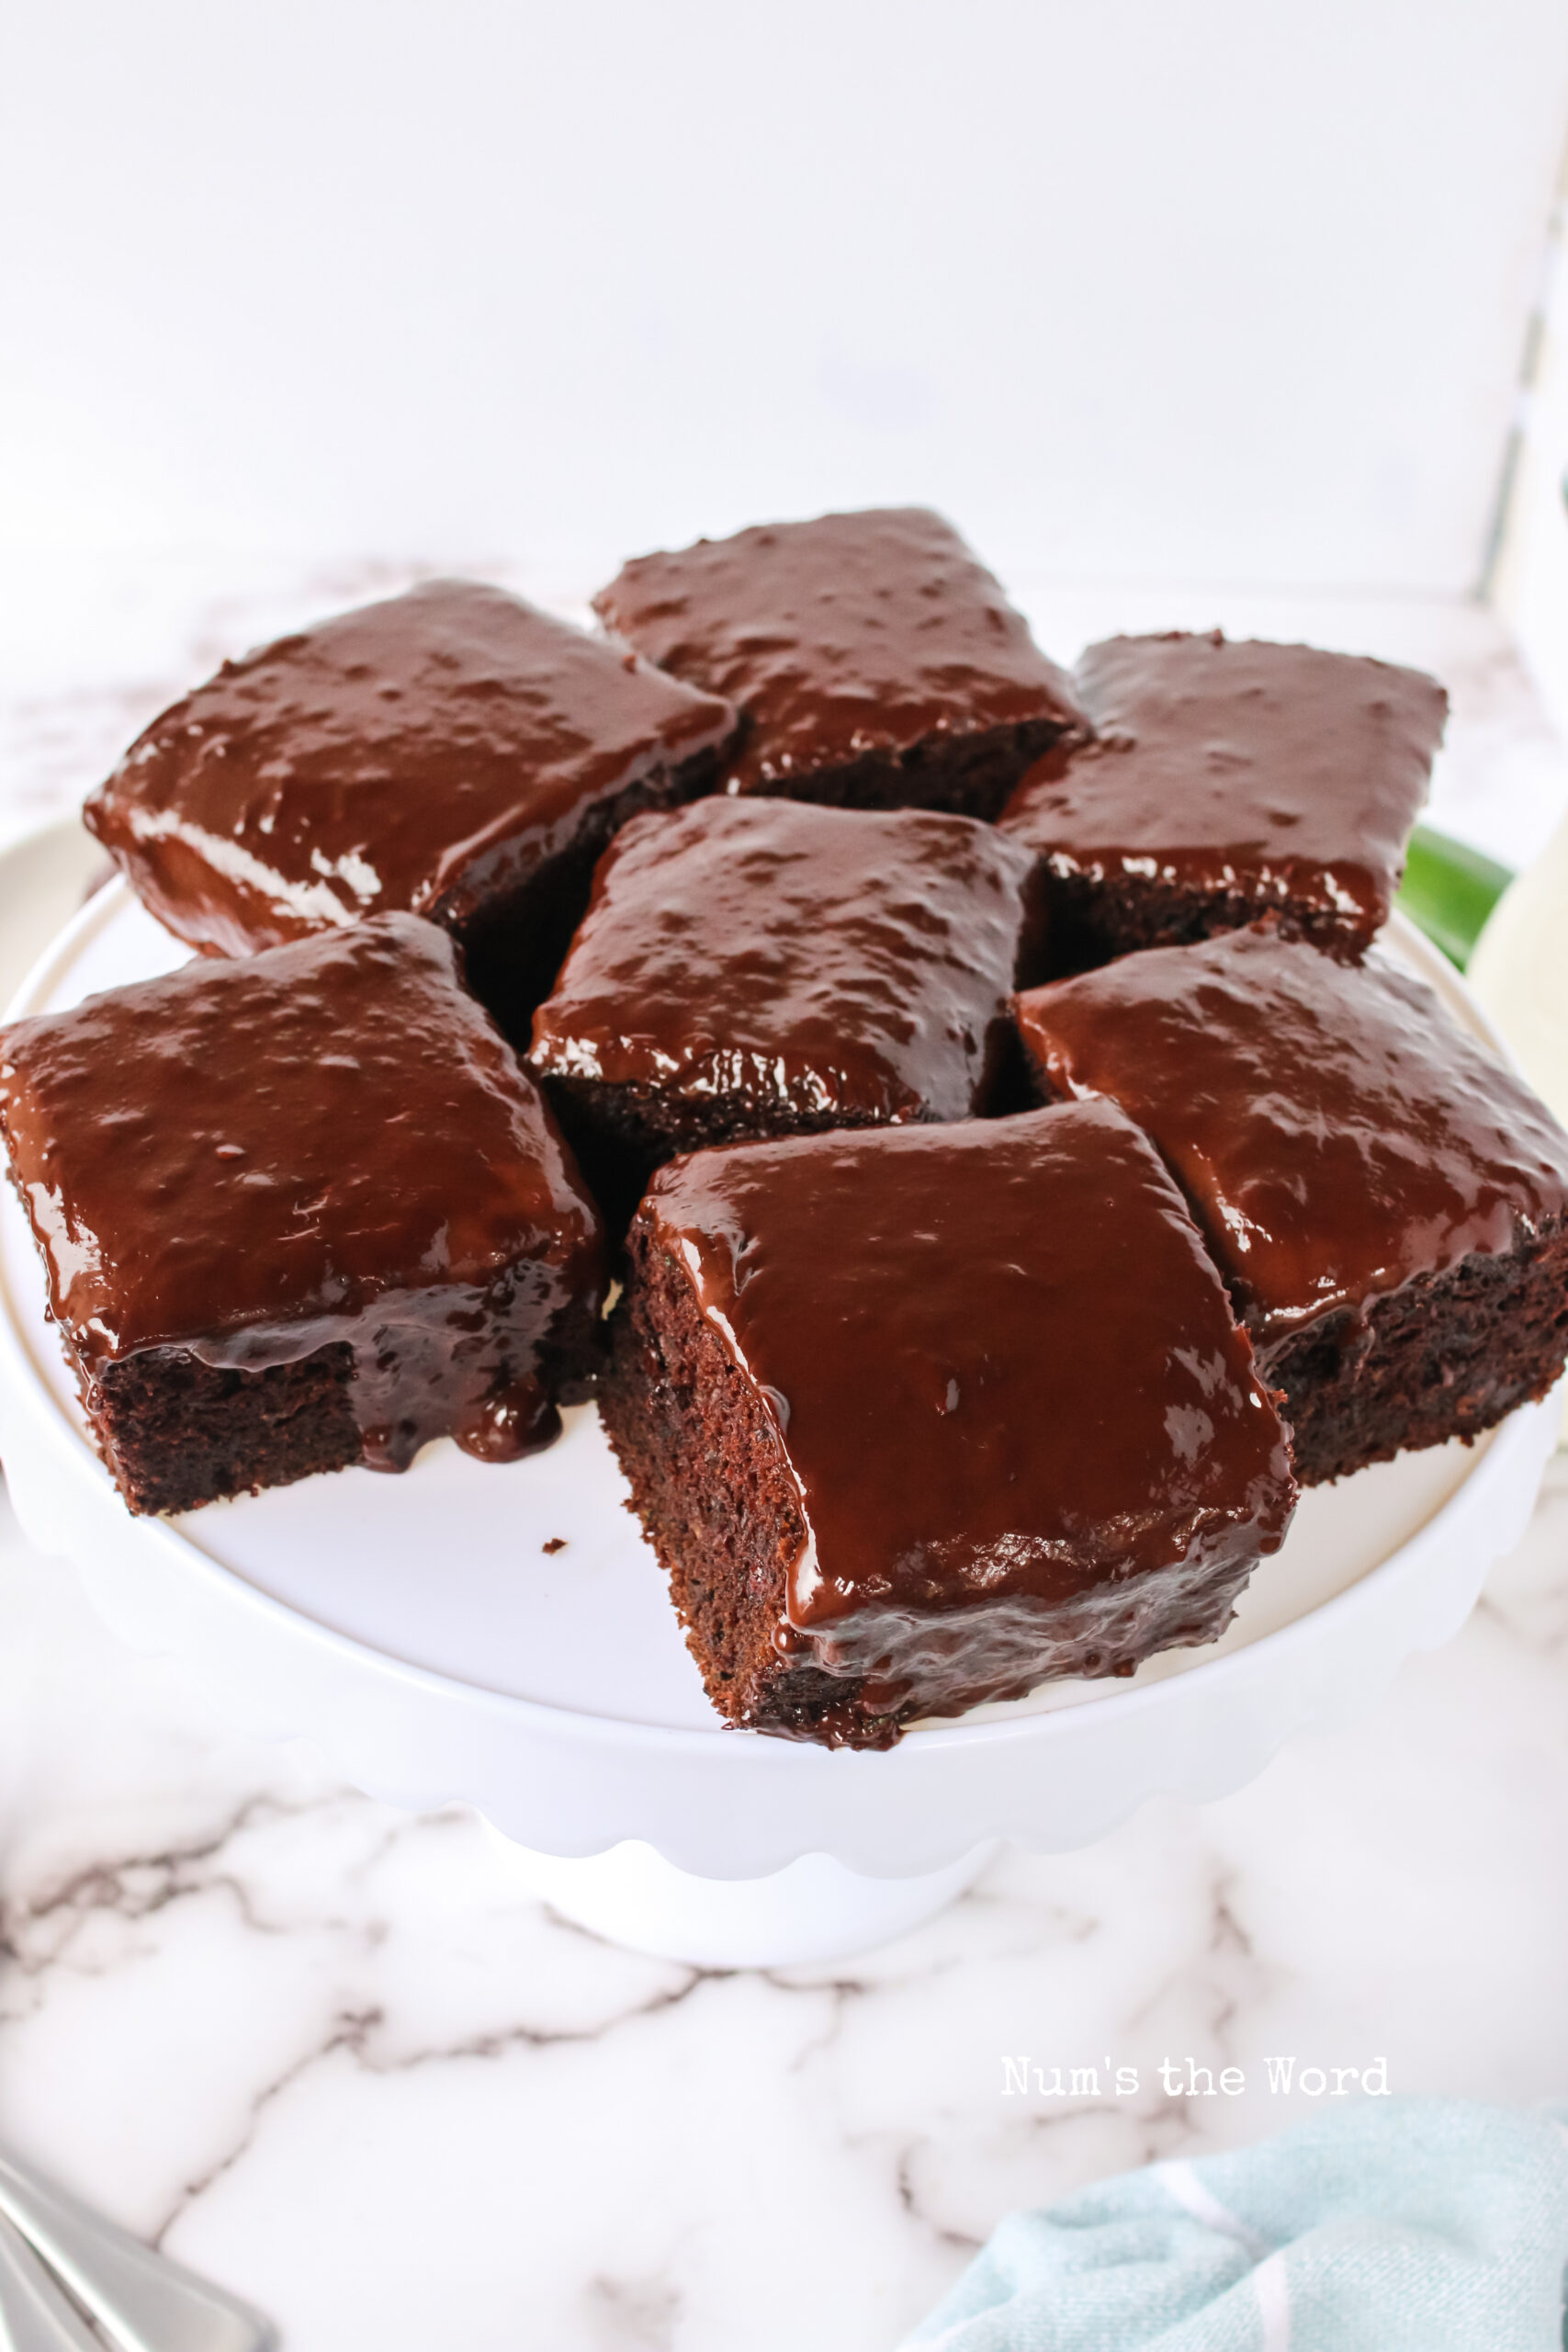 side view of chocolate cake slices on cake stand